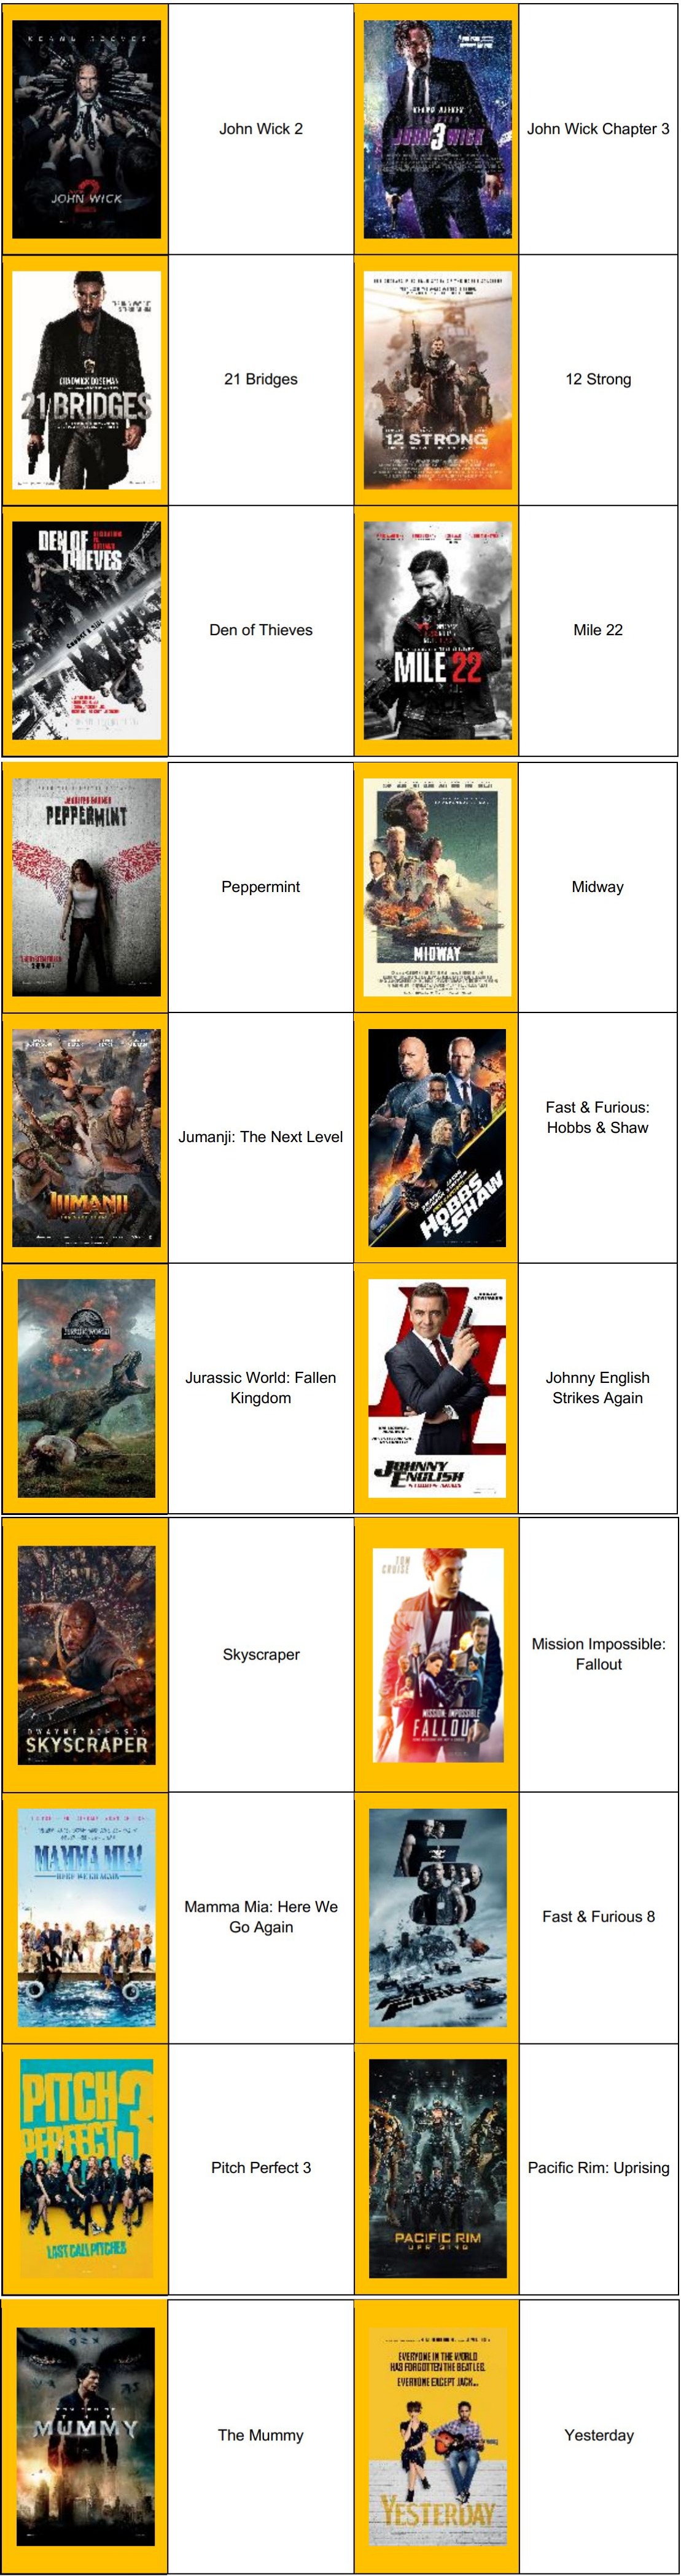 Golden Village’s $20 Movie Pass Lets You Watch Up To 8 Movie Titles - 1